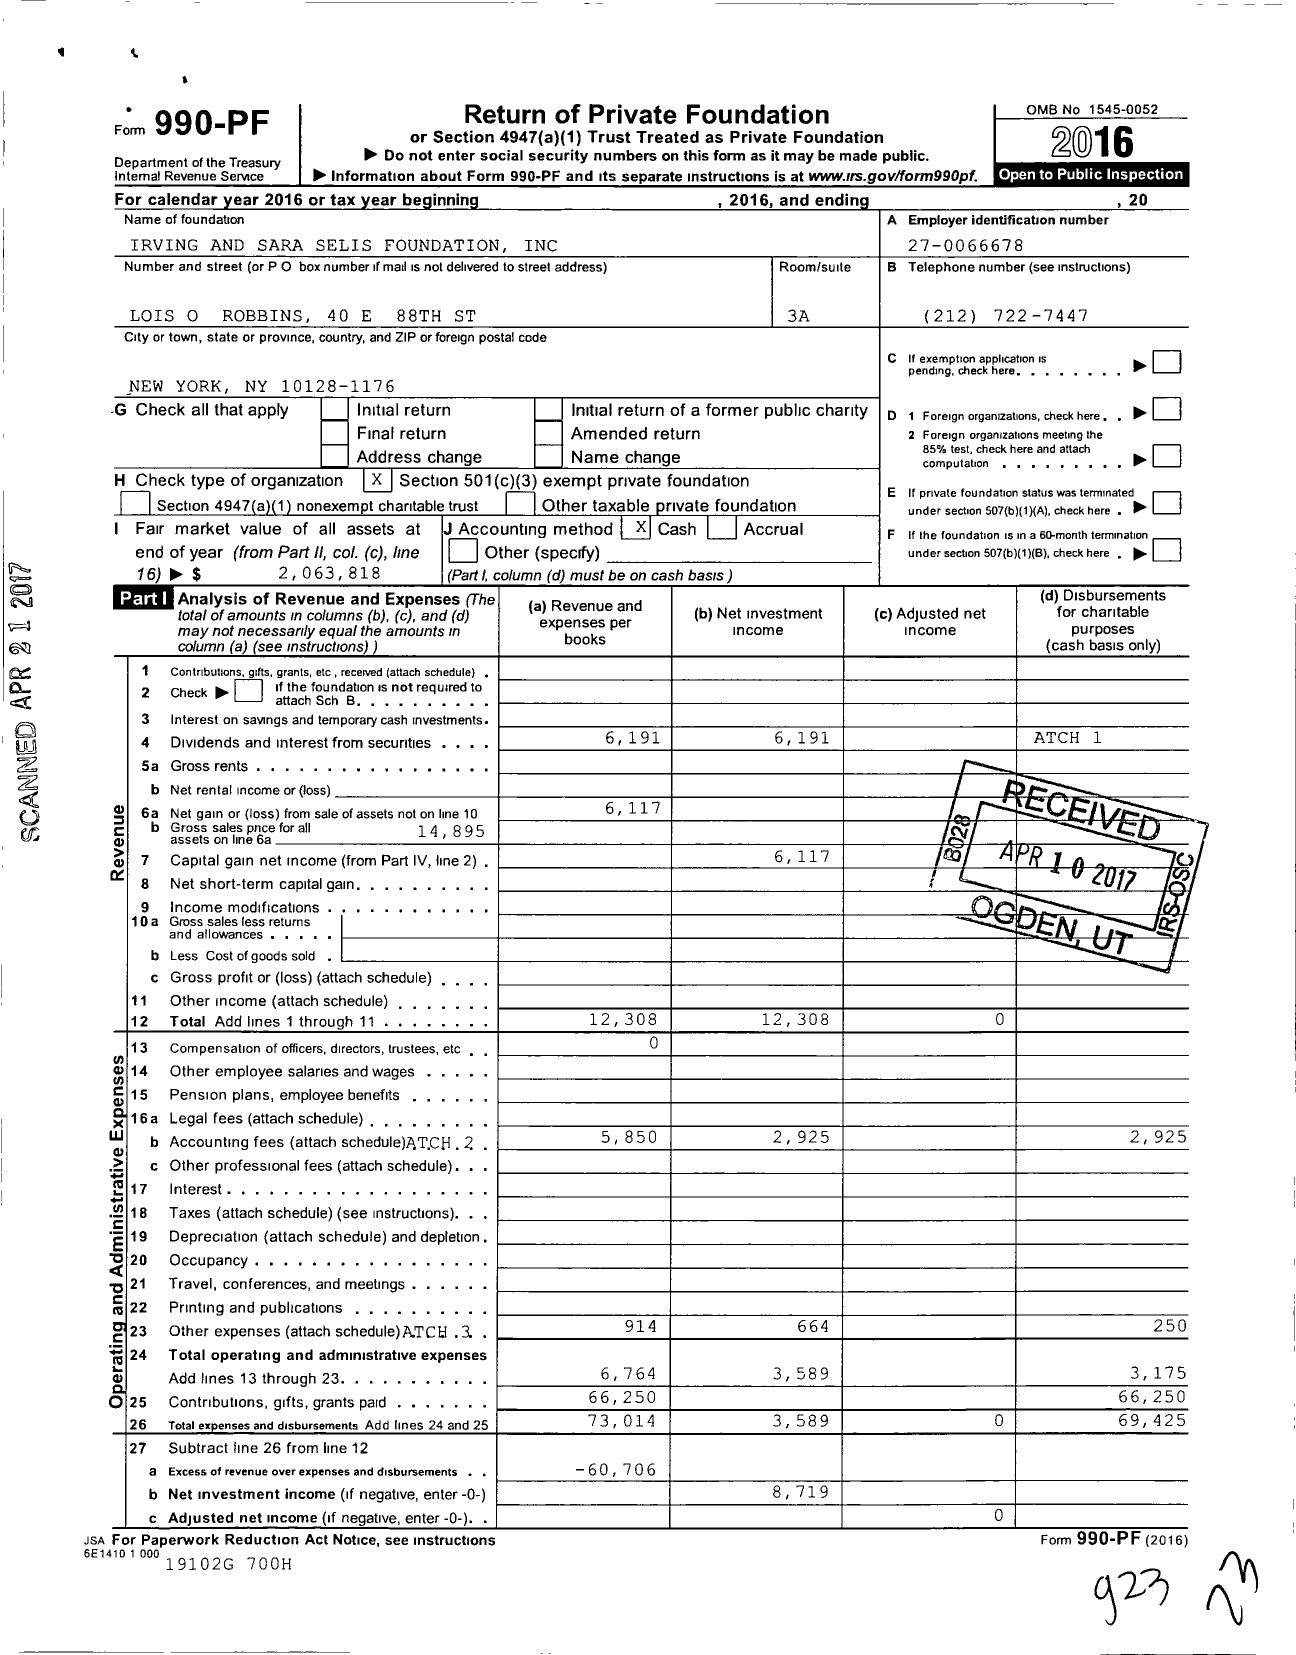 Image of first page of 2016 Form 990PF for Irving and Sara Selis Foundation